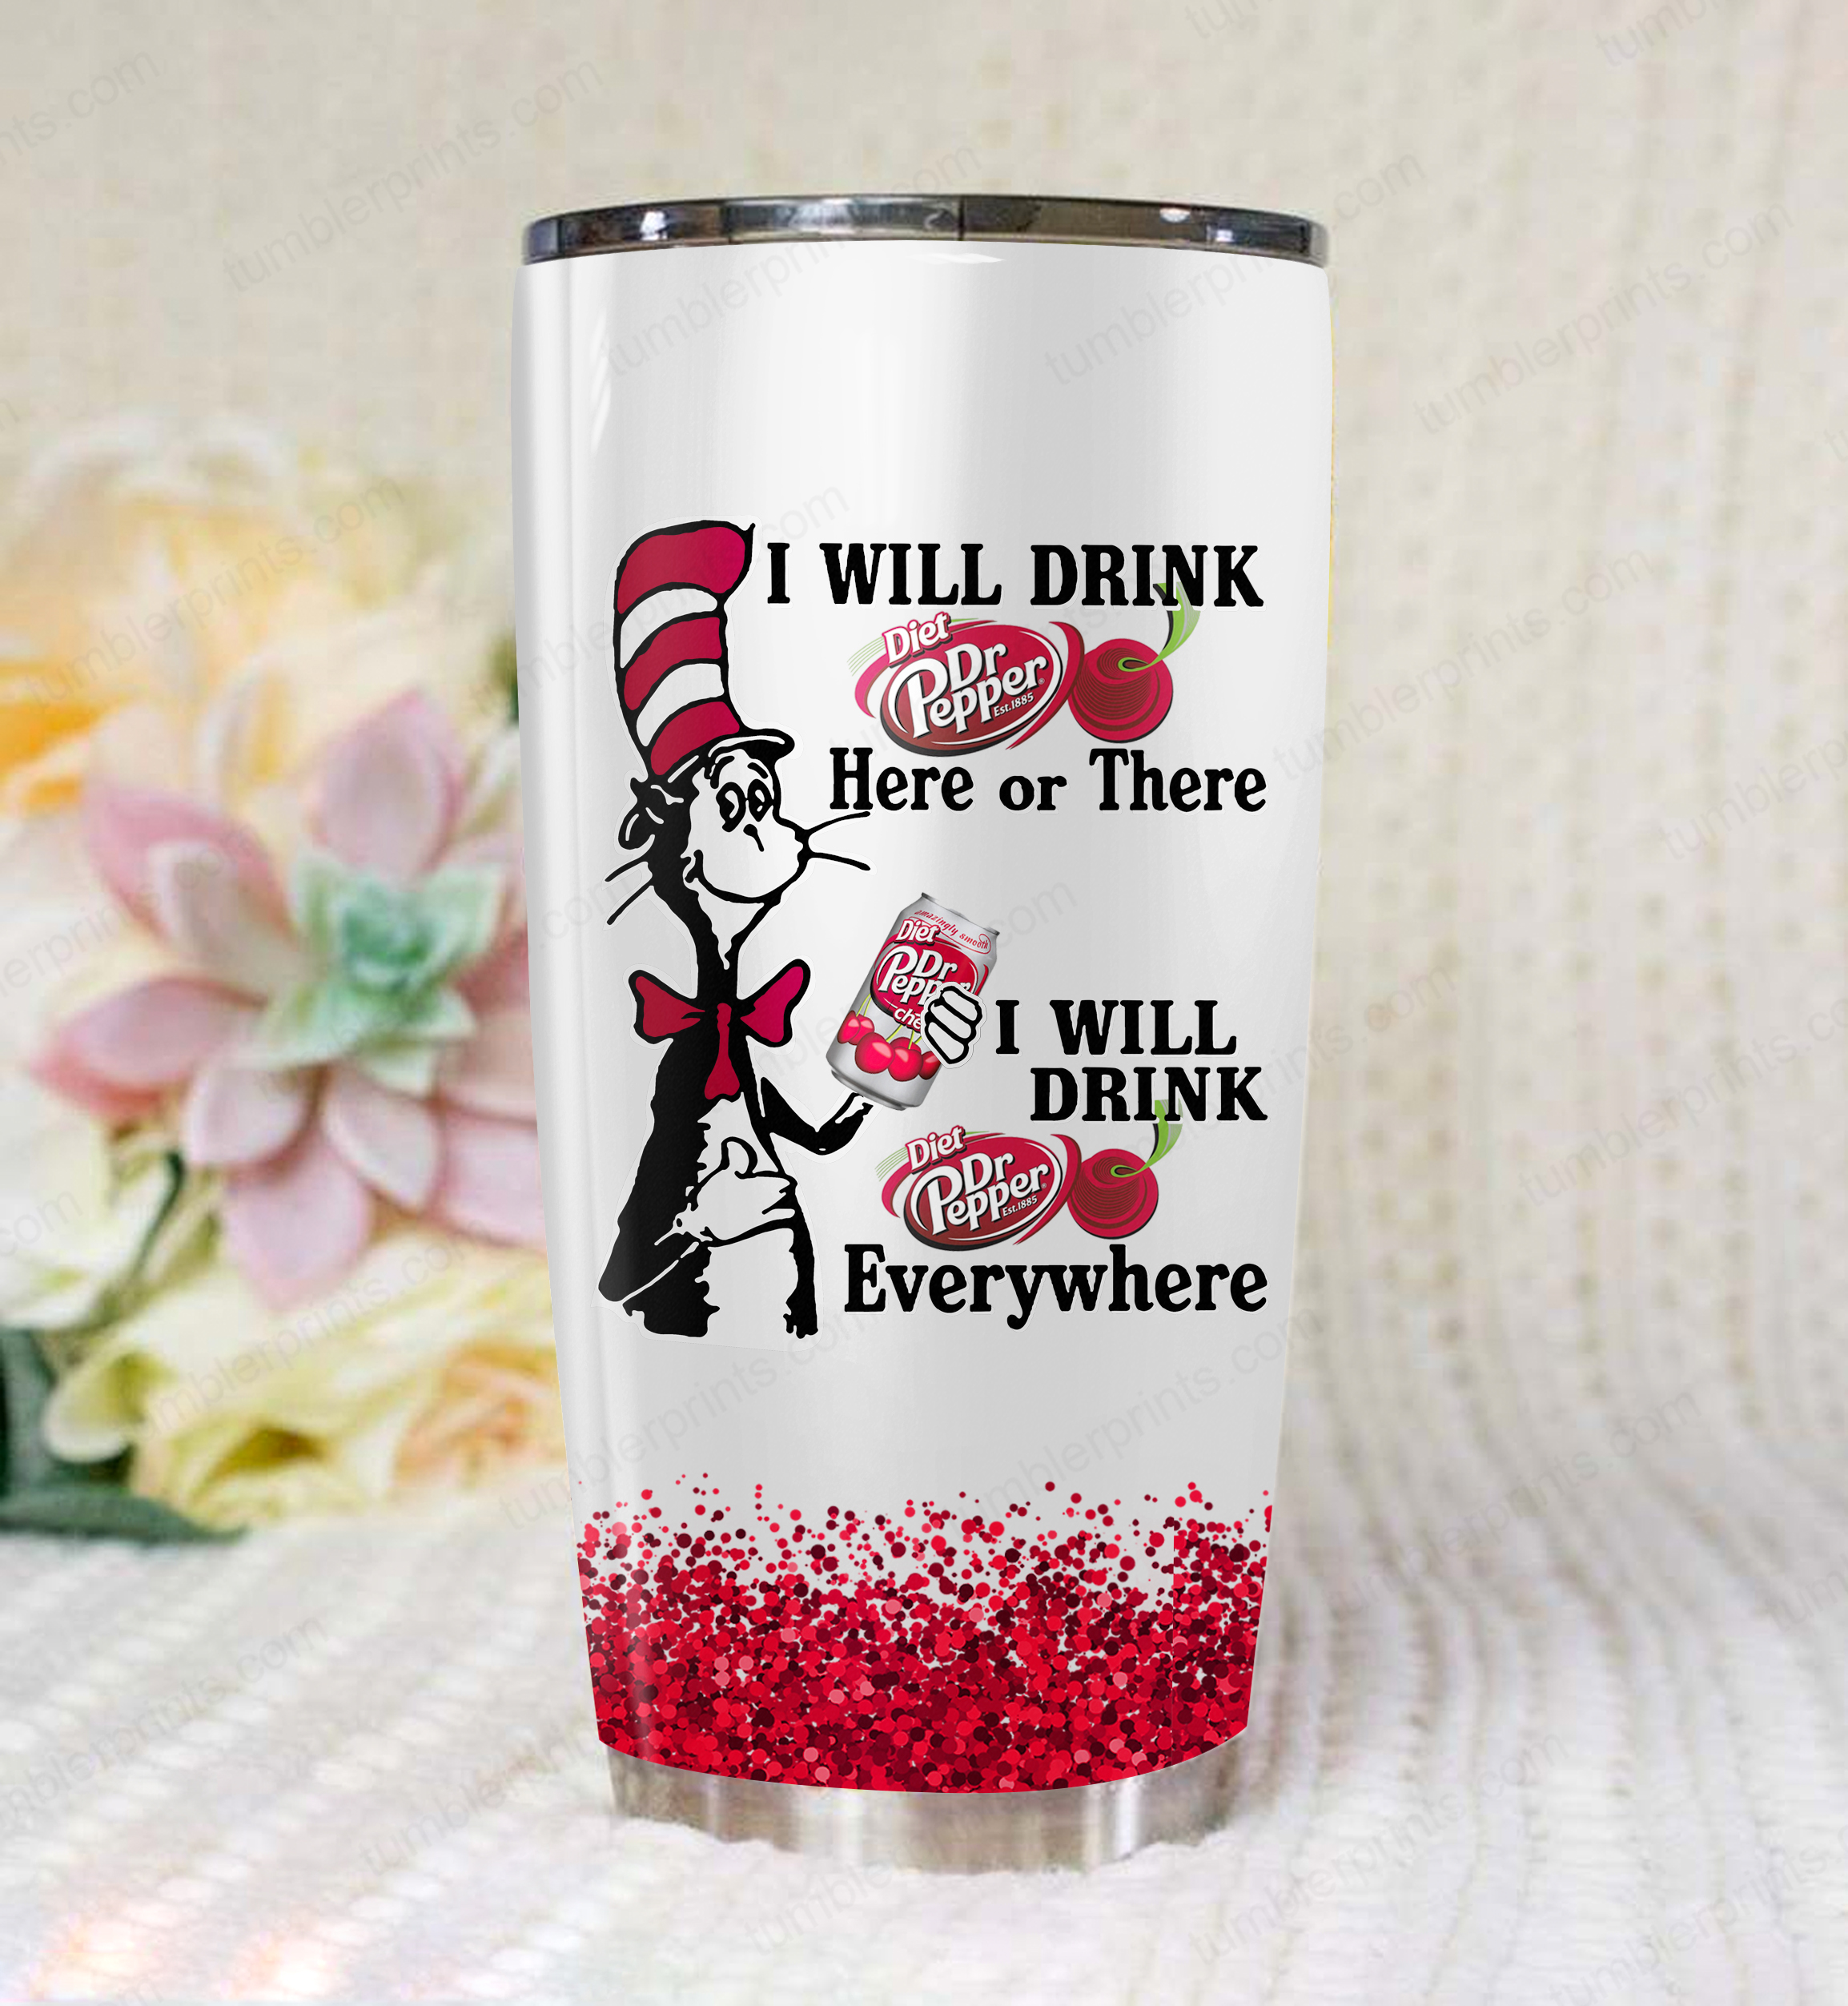 Dr seuss i will drink dr pepper cherry all over printed tumbler 2